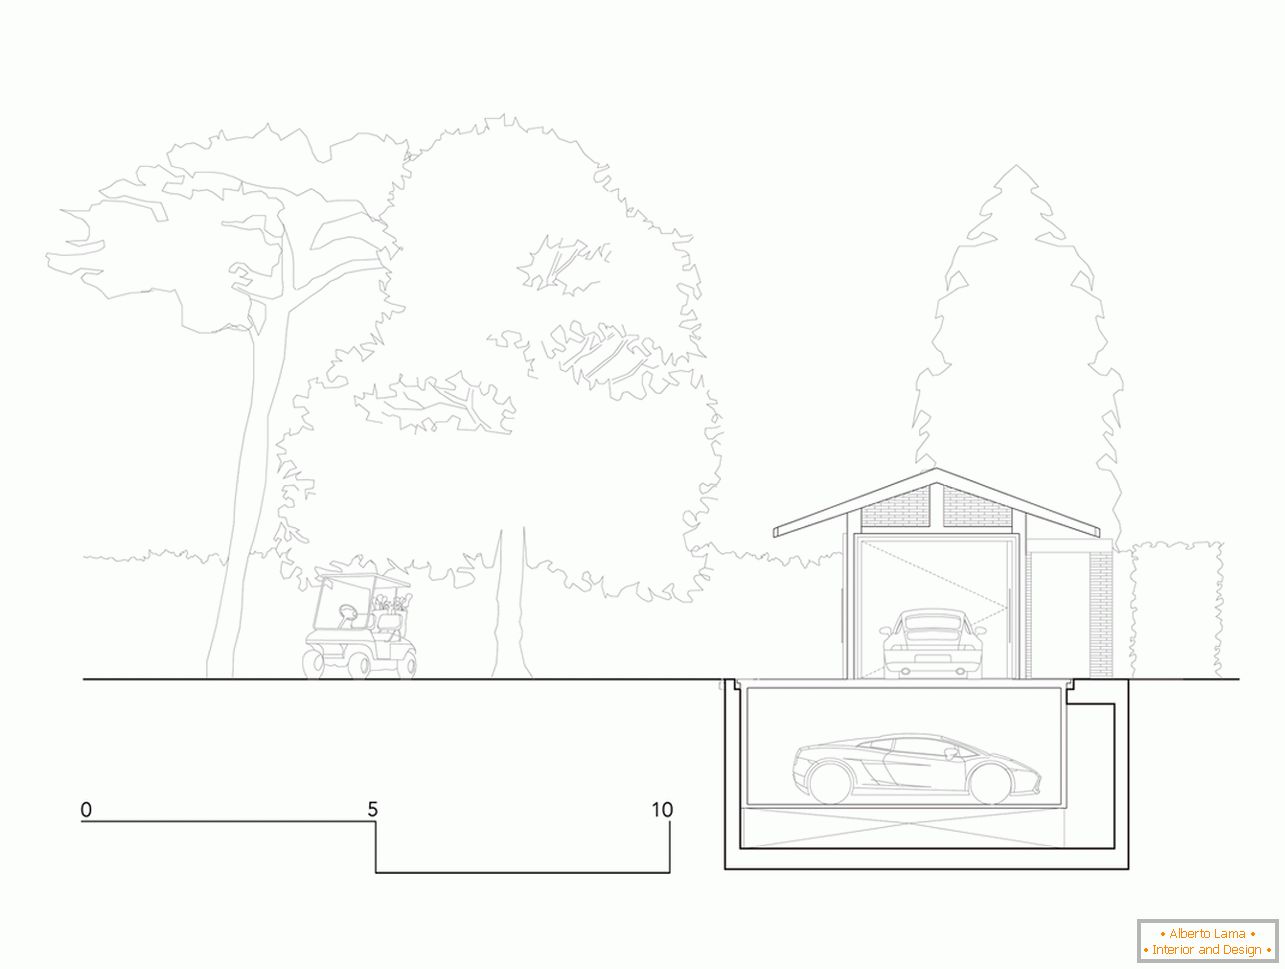 The layout of the garage with a canopy